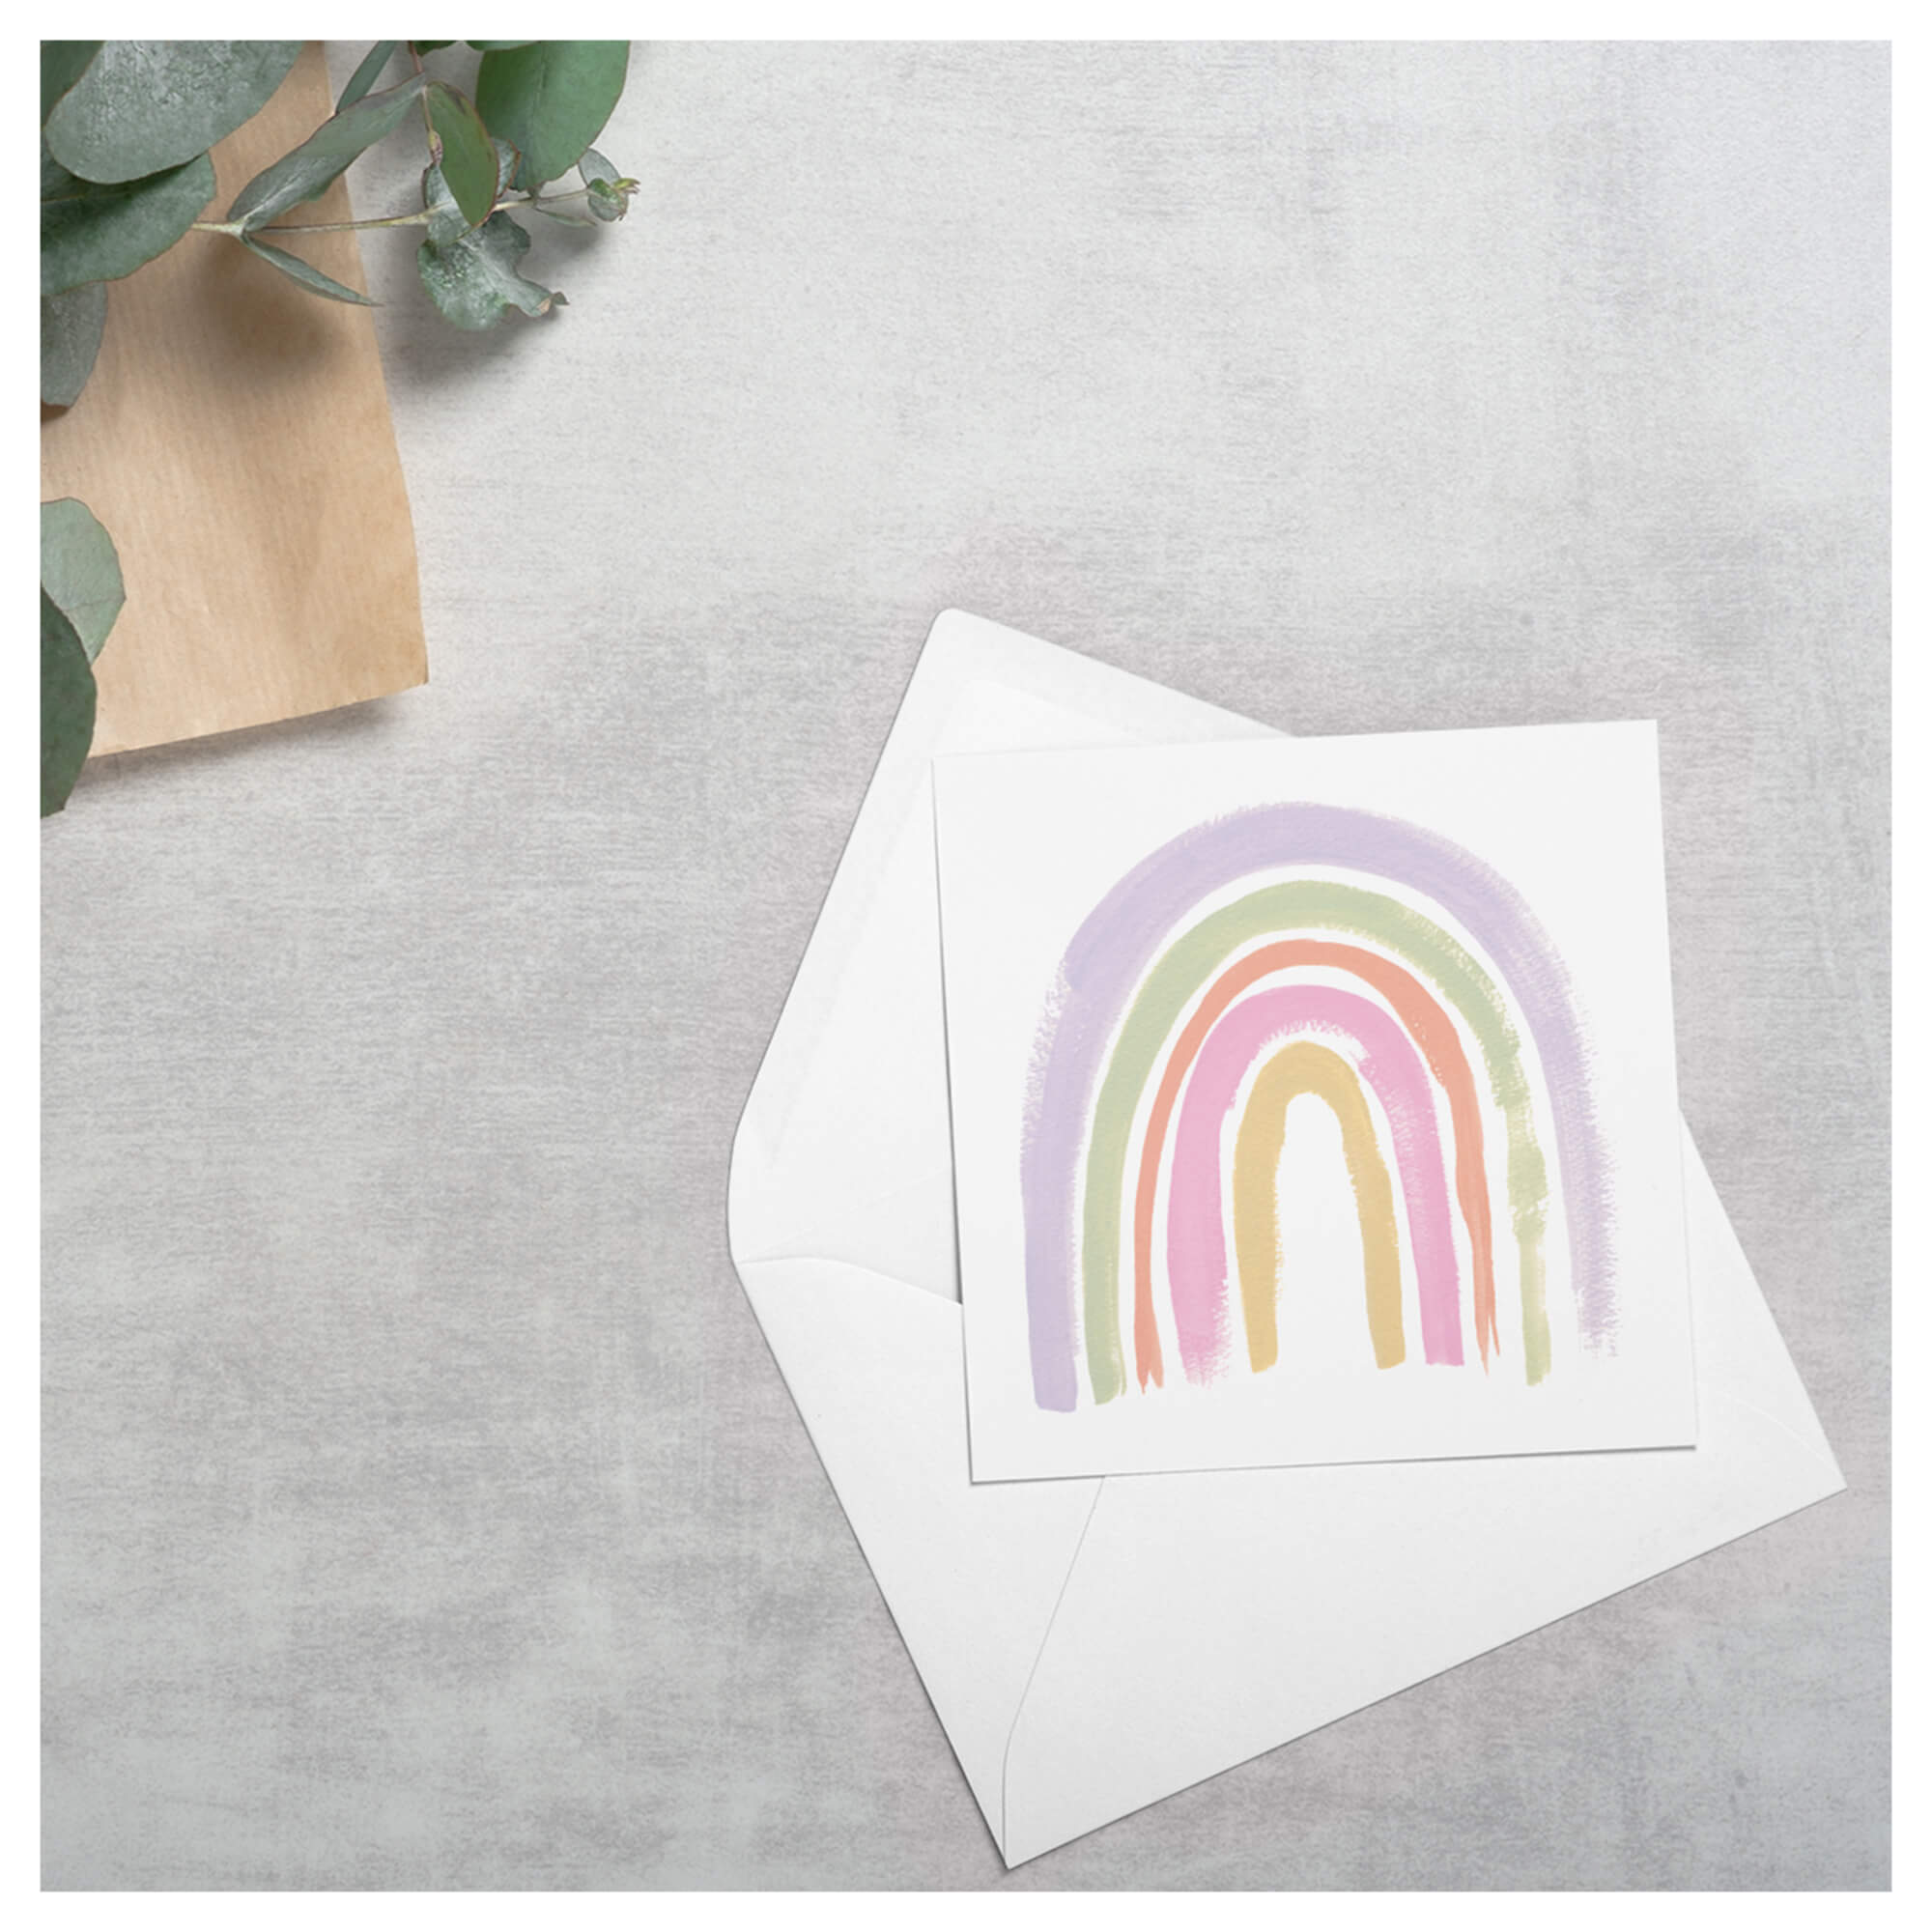 A greeting card that features a beautifully painted rainbow with purple as its main color by famous Hawaii artist Lauren Roth